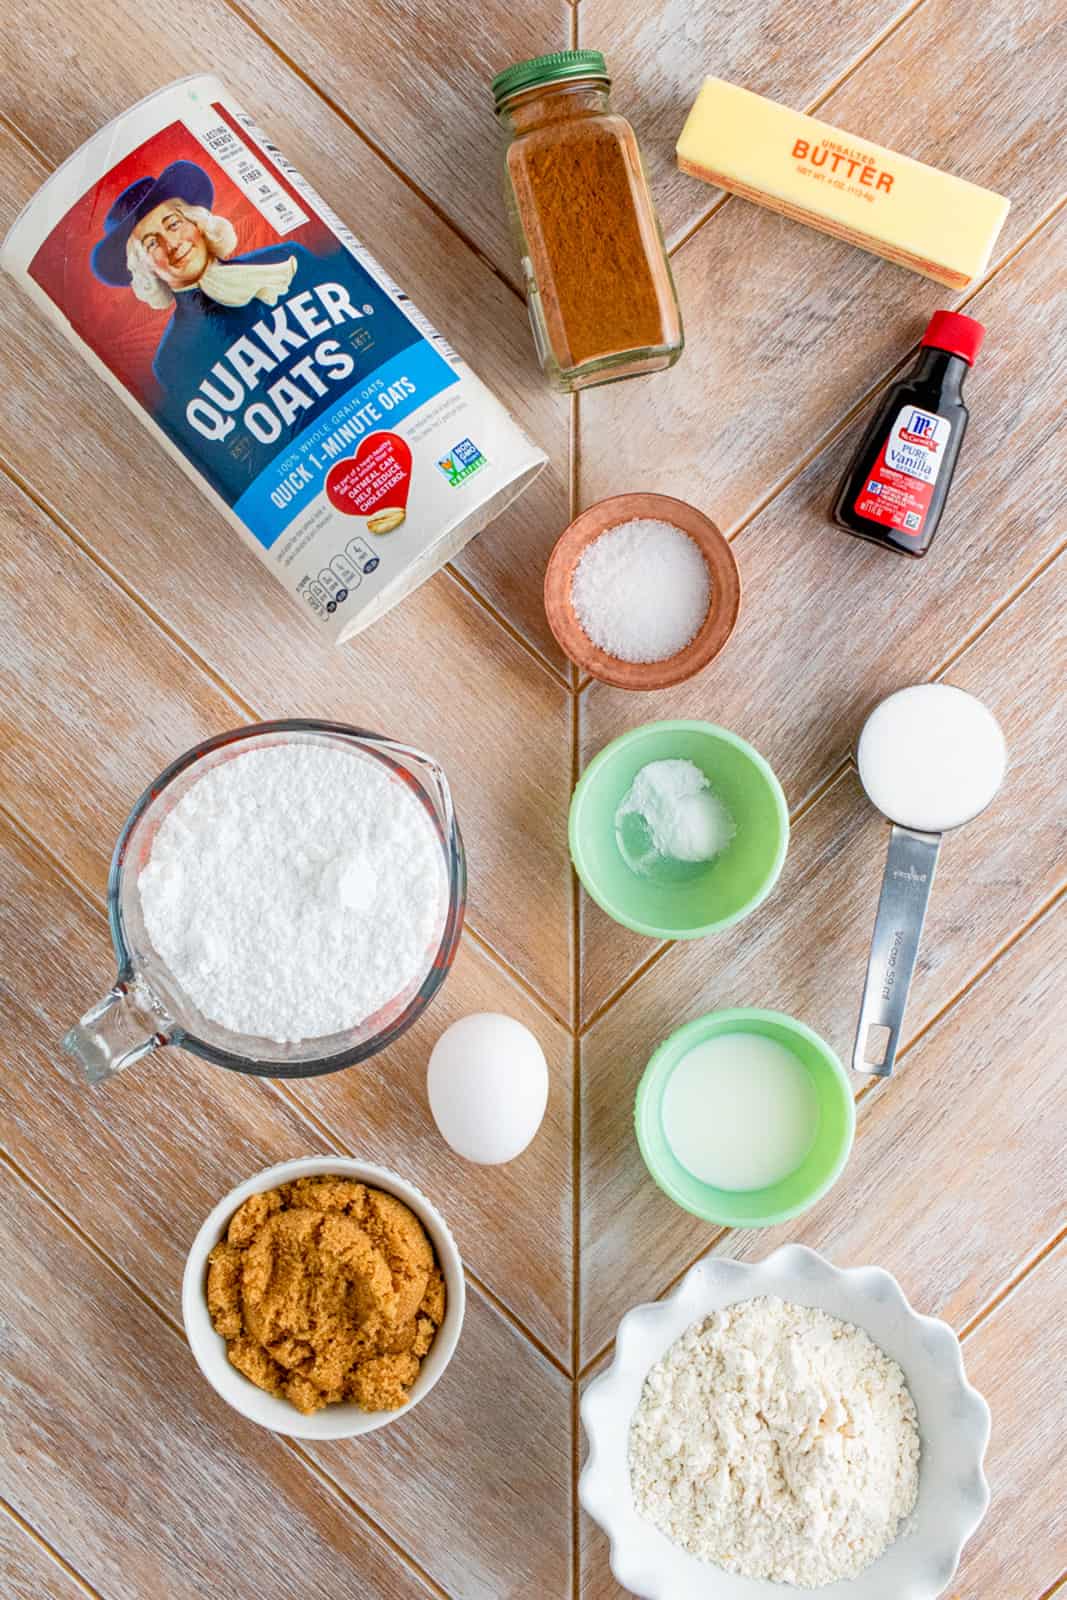 Ingredients needed to make Oatmeal Cream Pies